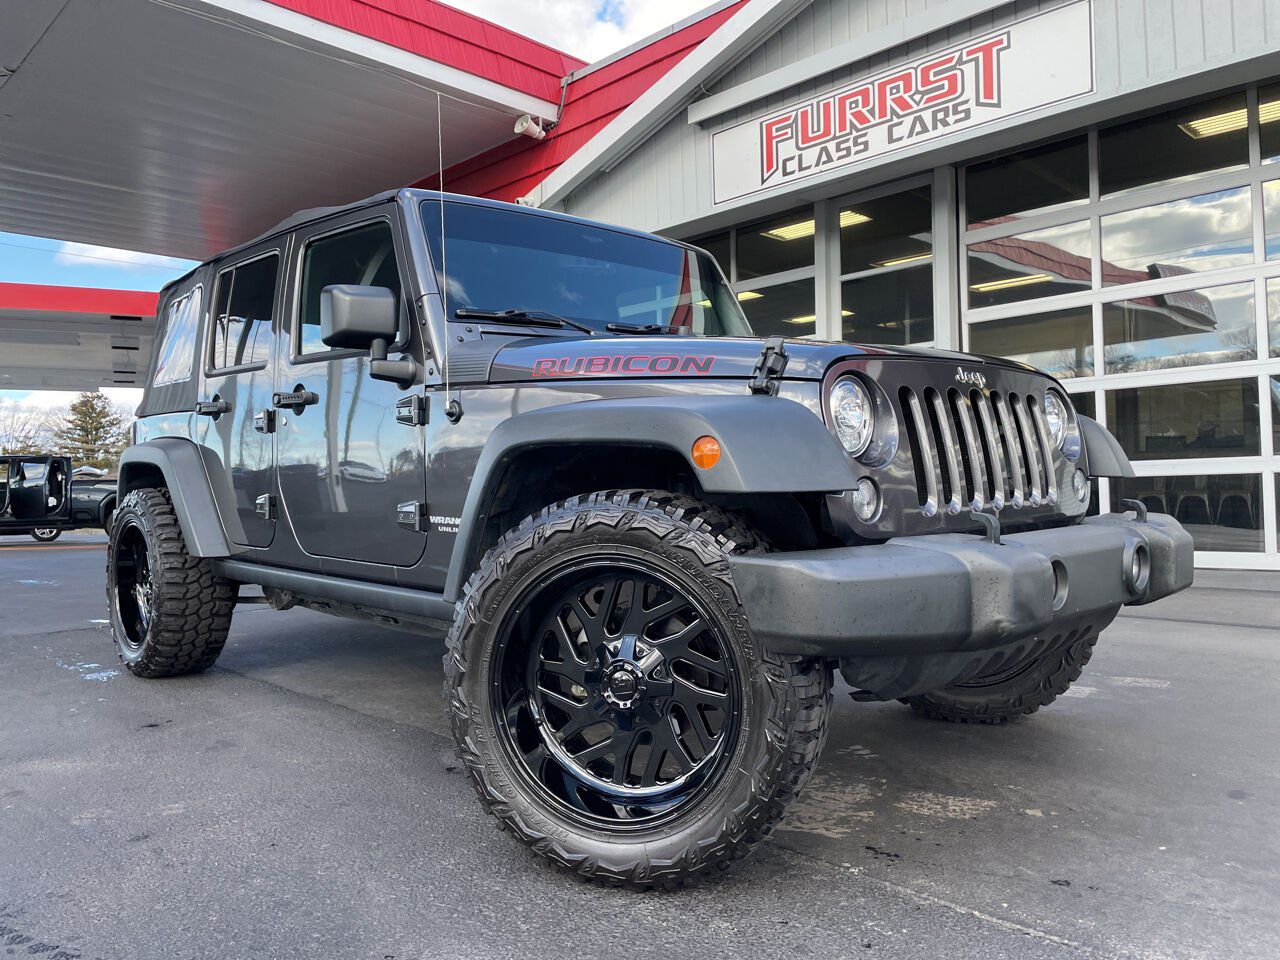 2017 Jeep Wrangler Unlimited for Sale in Charlotte, NC - OfferUp